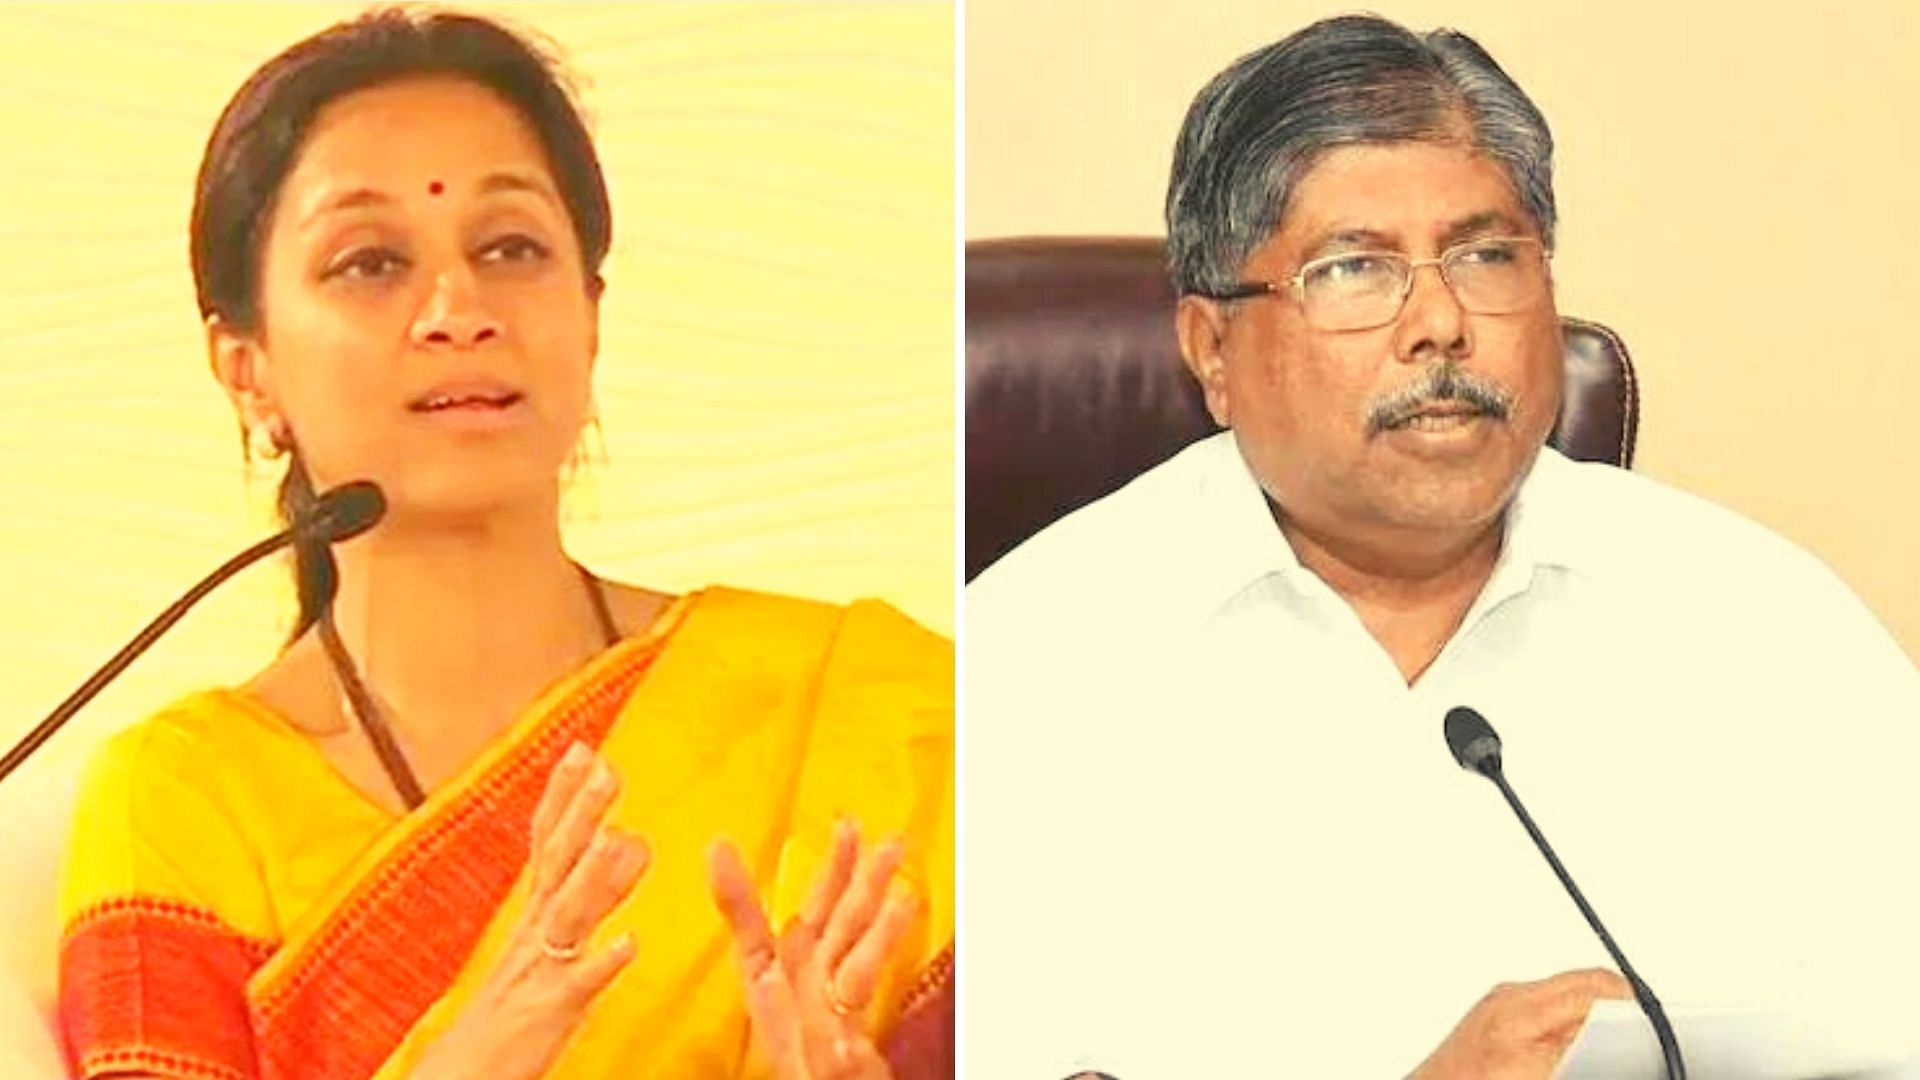 <div class="paragraphs"><p>Maharashtra BJP Chief Chandrakant Patil, drew flak for his misogynistic remark asking Lok Sabha MP Supriya Sule to "go home and cook".</p></div>